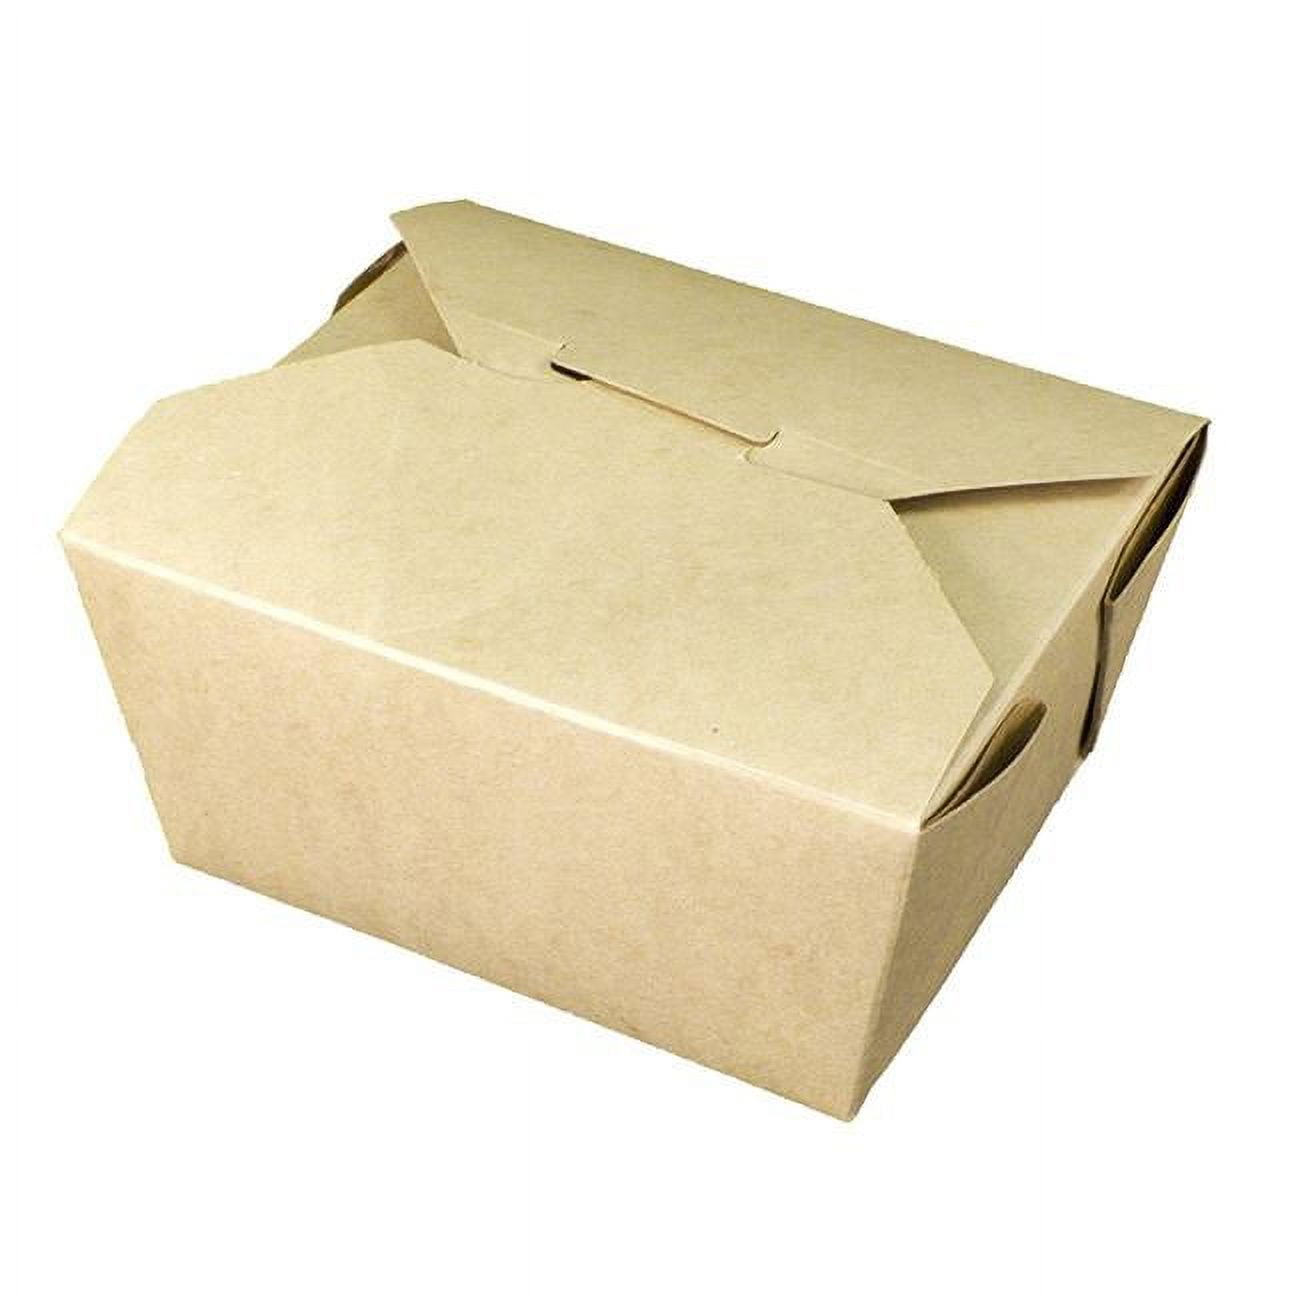 01bpearthm Cpc Natural Kraft Paper Container, Case Of 450